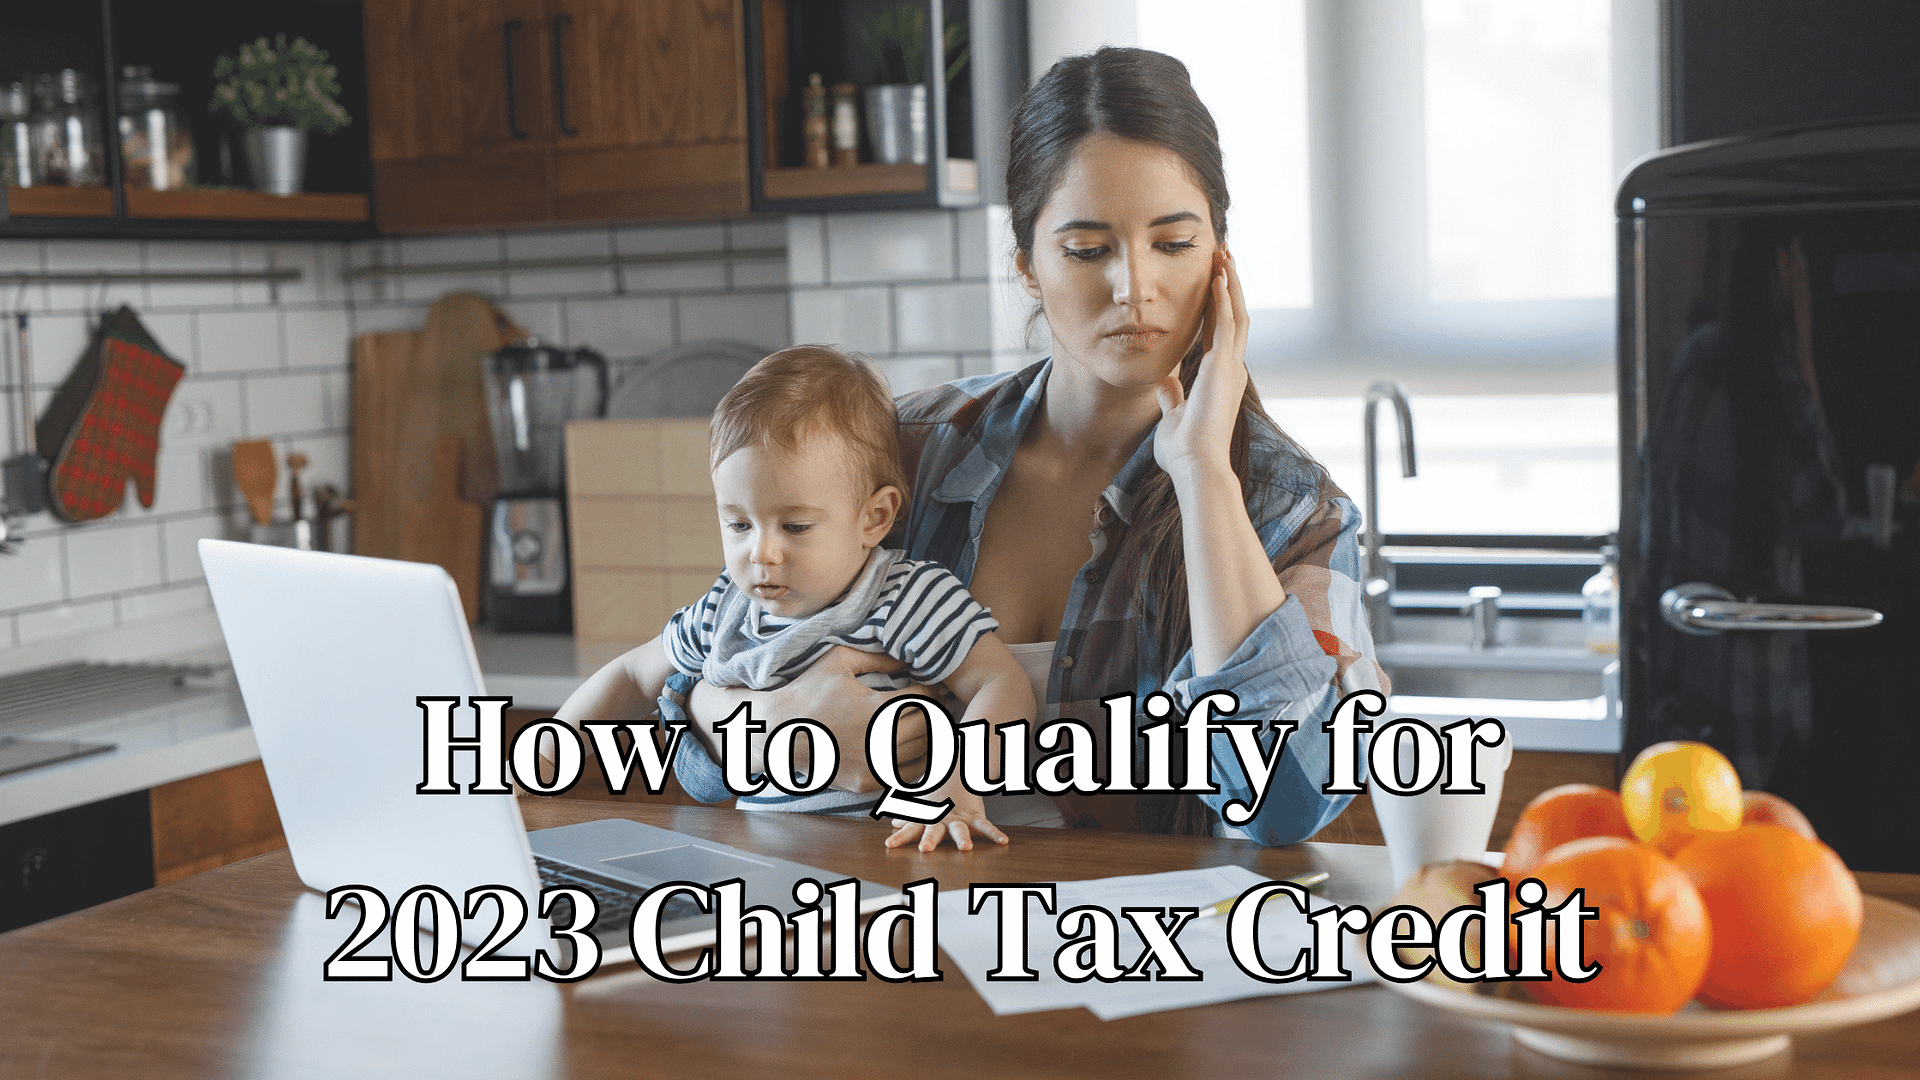 How to Qualify for 2023 Child Tax Credit